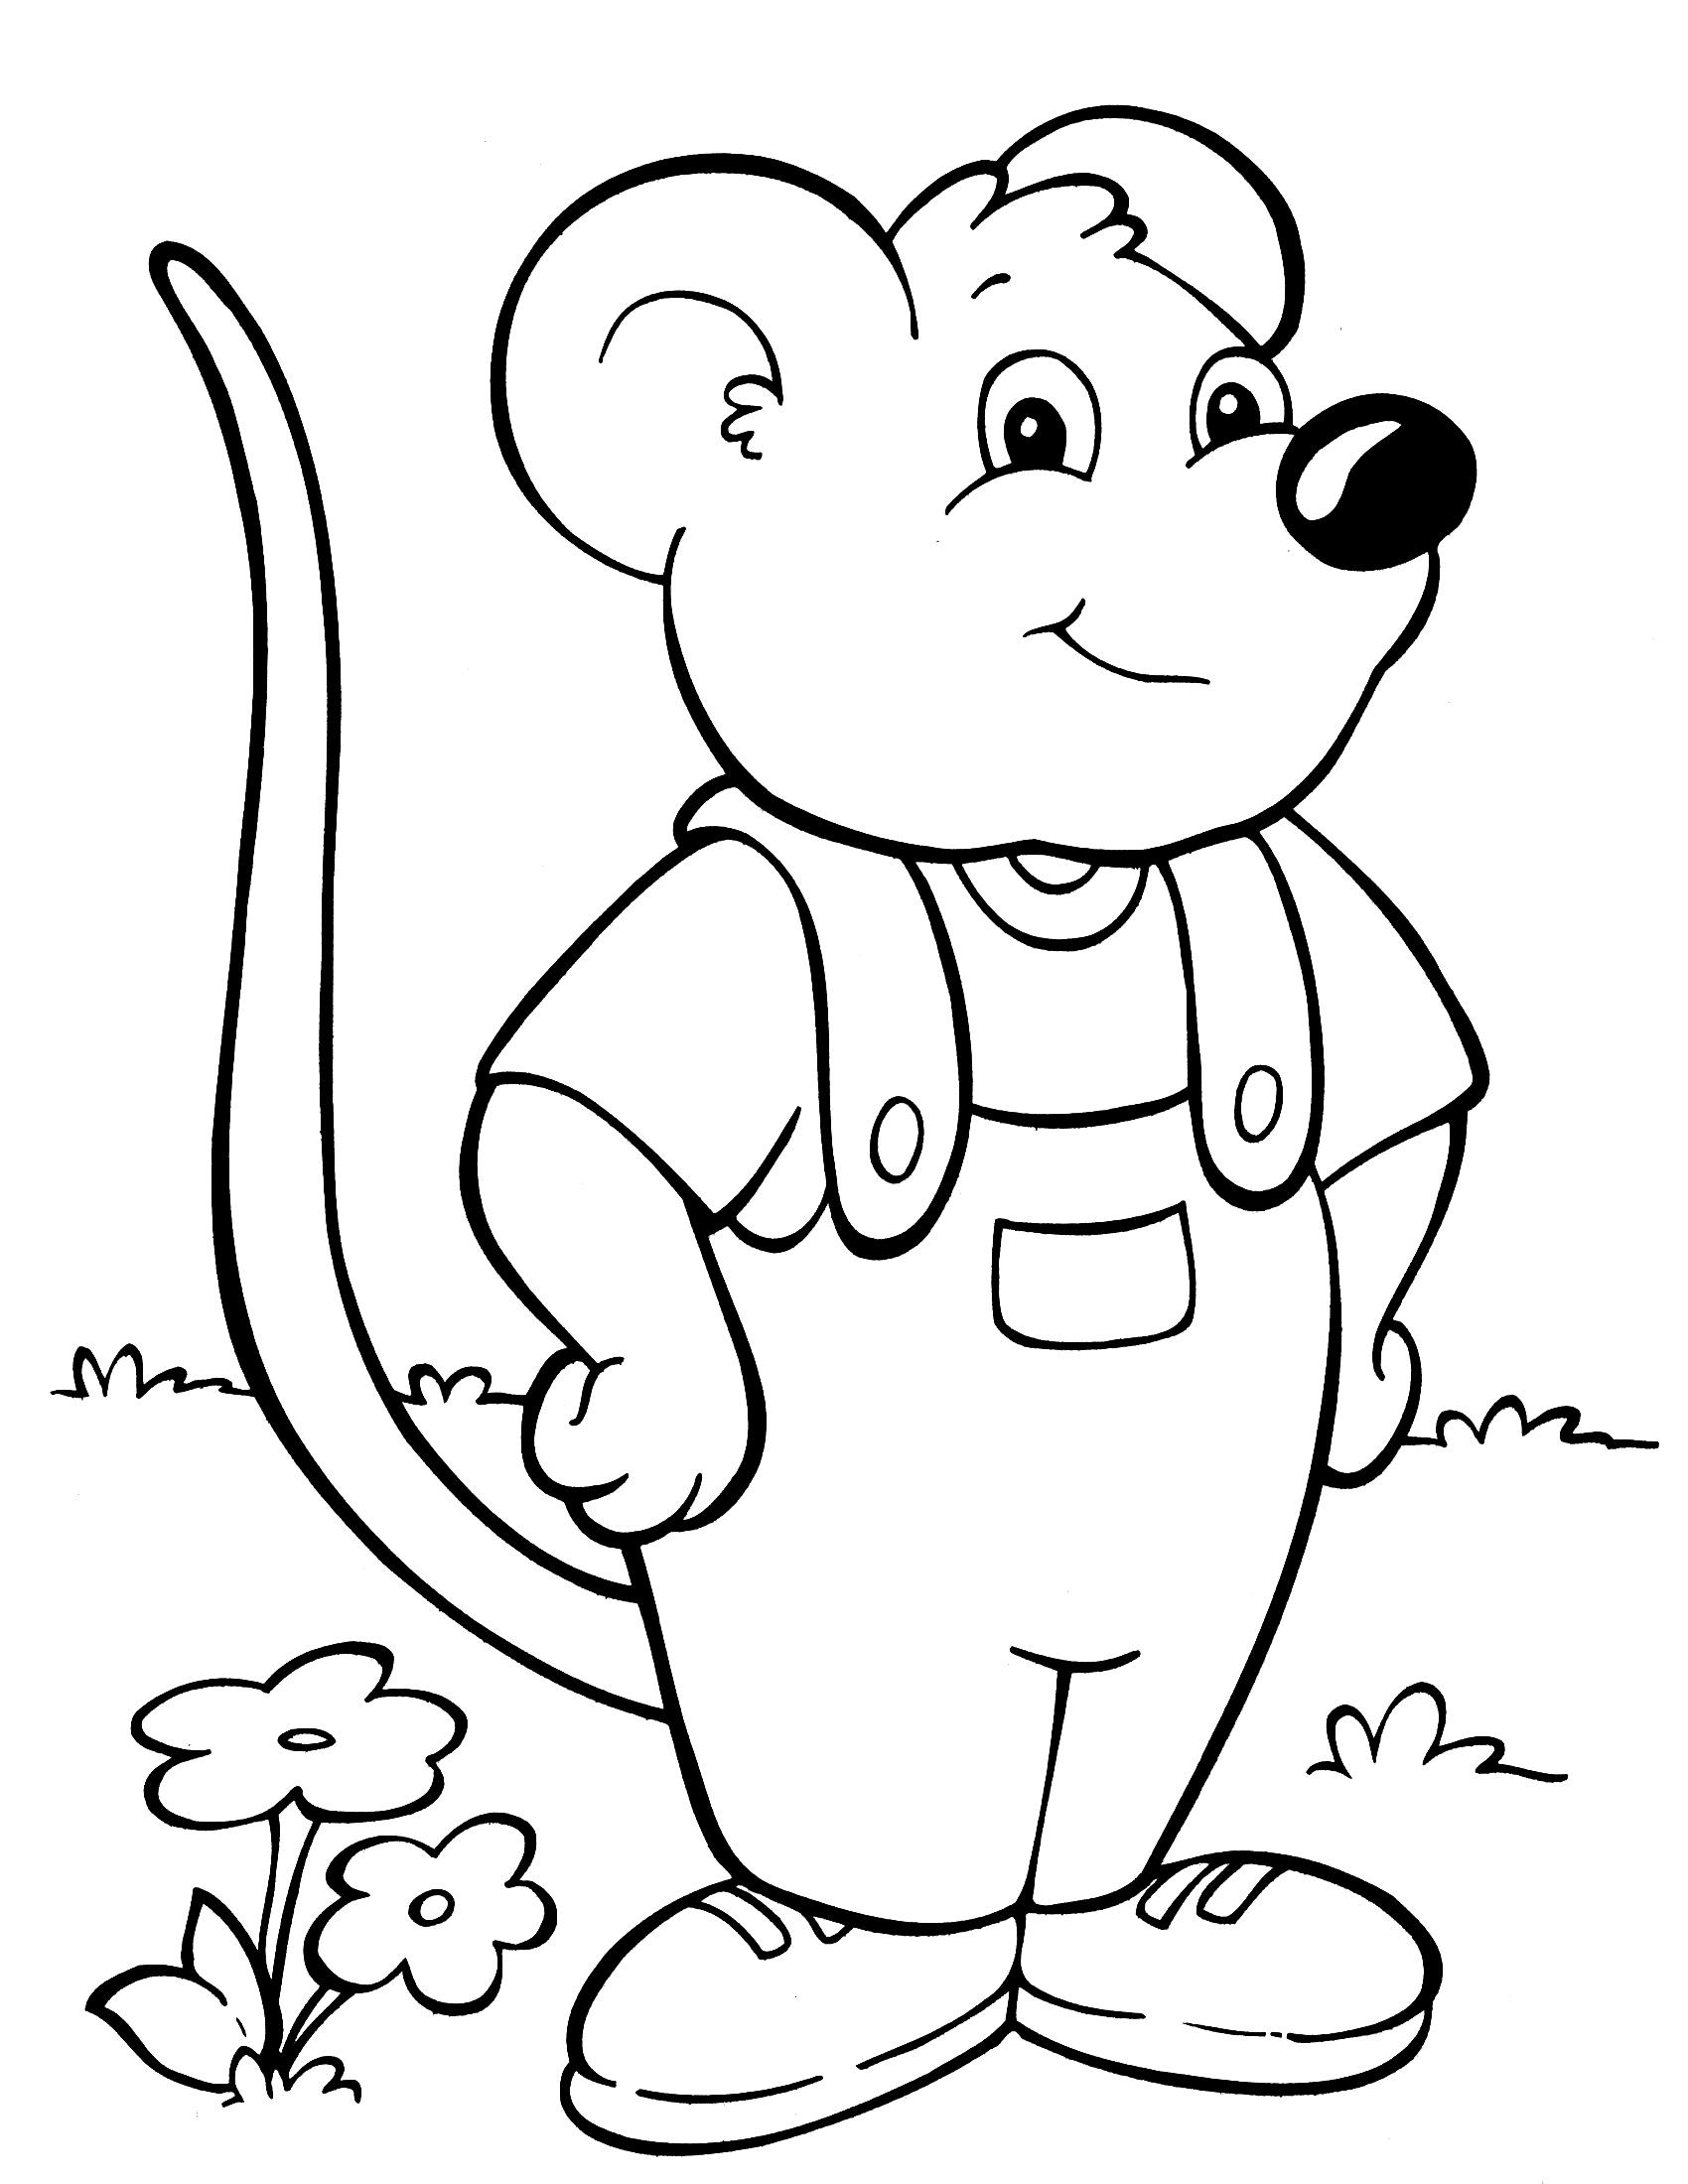 Crayola Coloring Pages For Kids Printable At GetDrawings Free Download